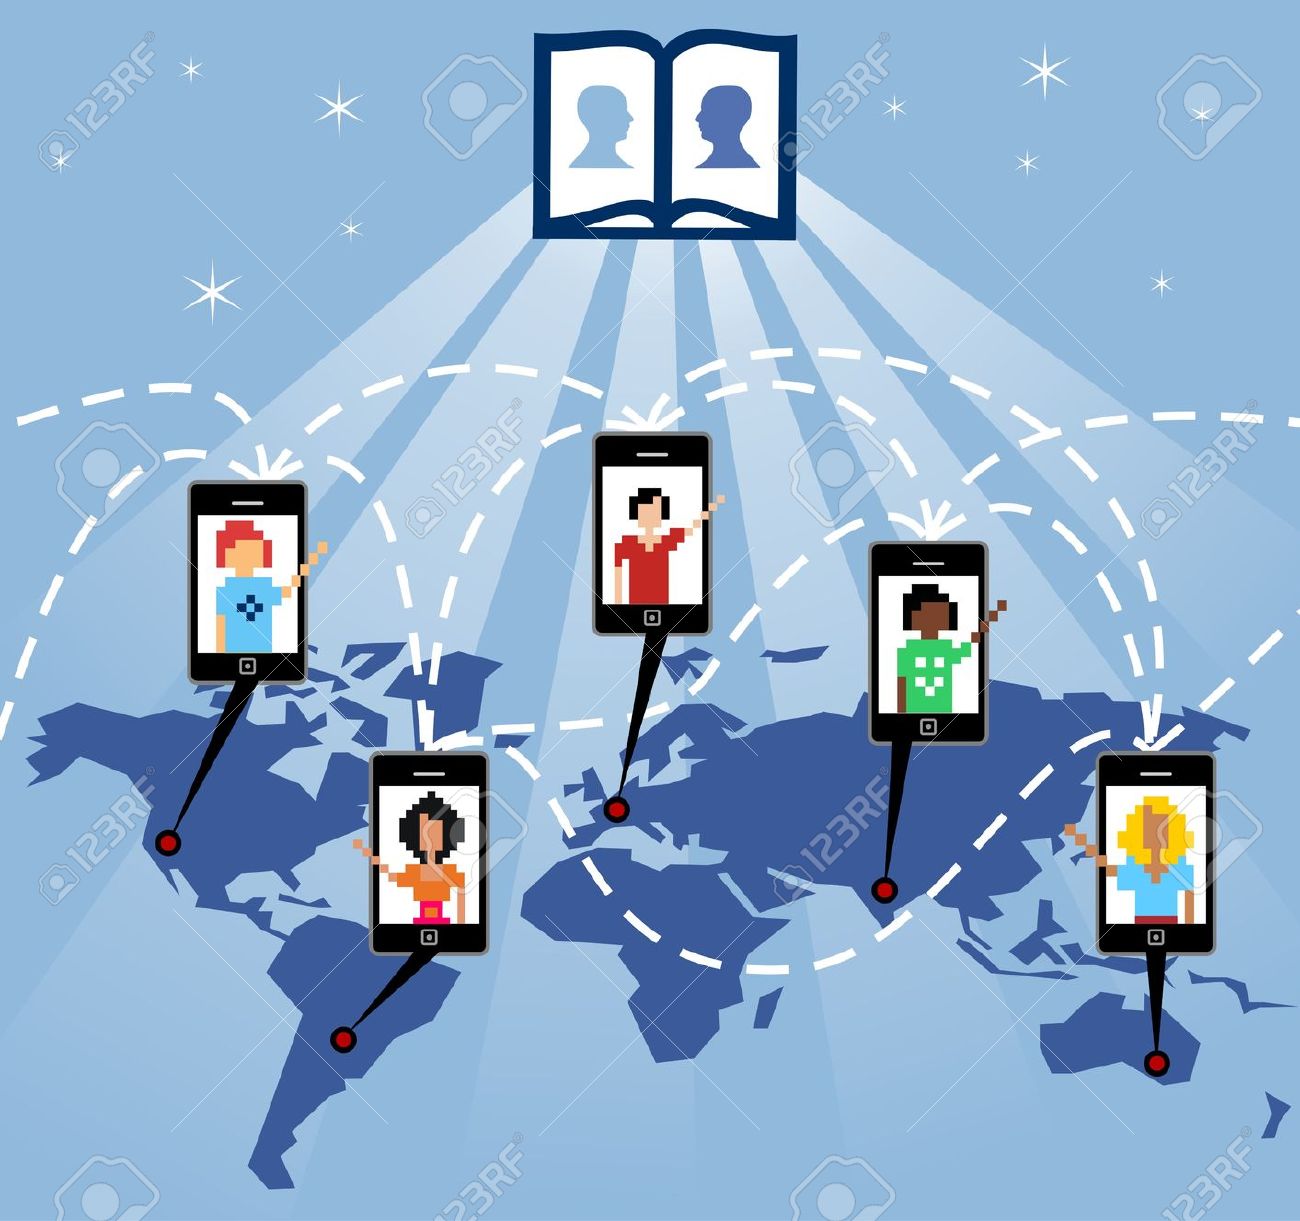 8719393-the-mobile-phone-connects-people-worldwide-through-the-social-network-stock-vector-2